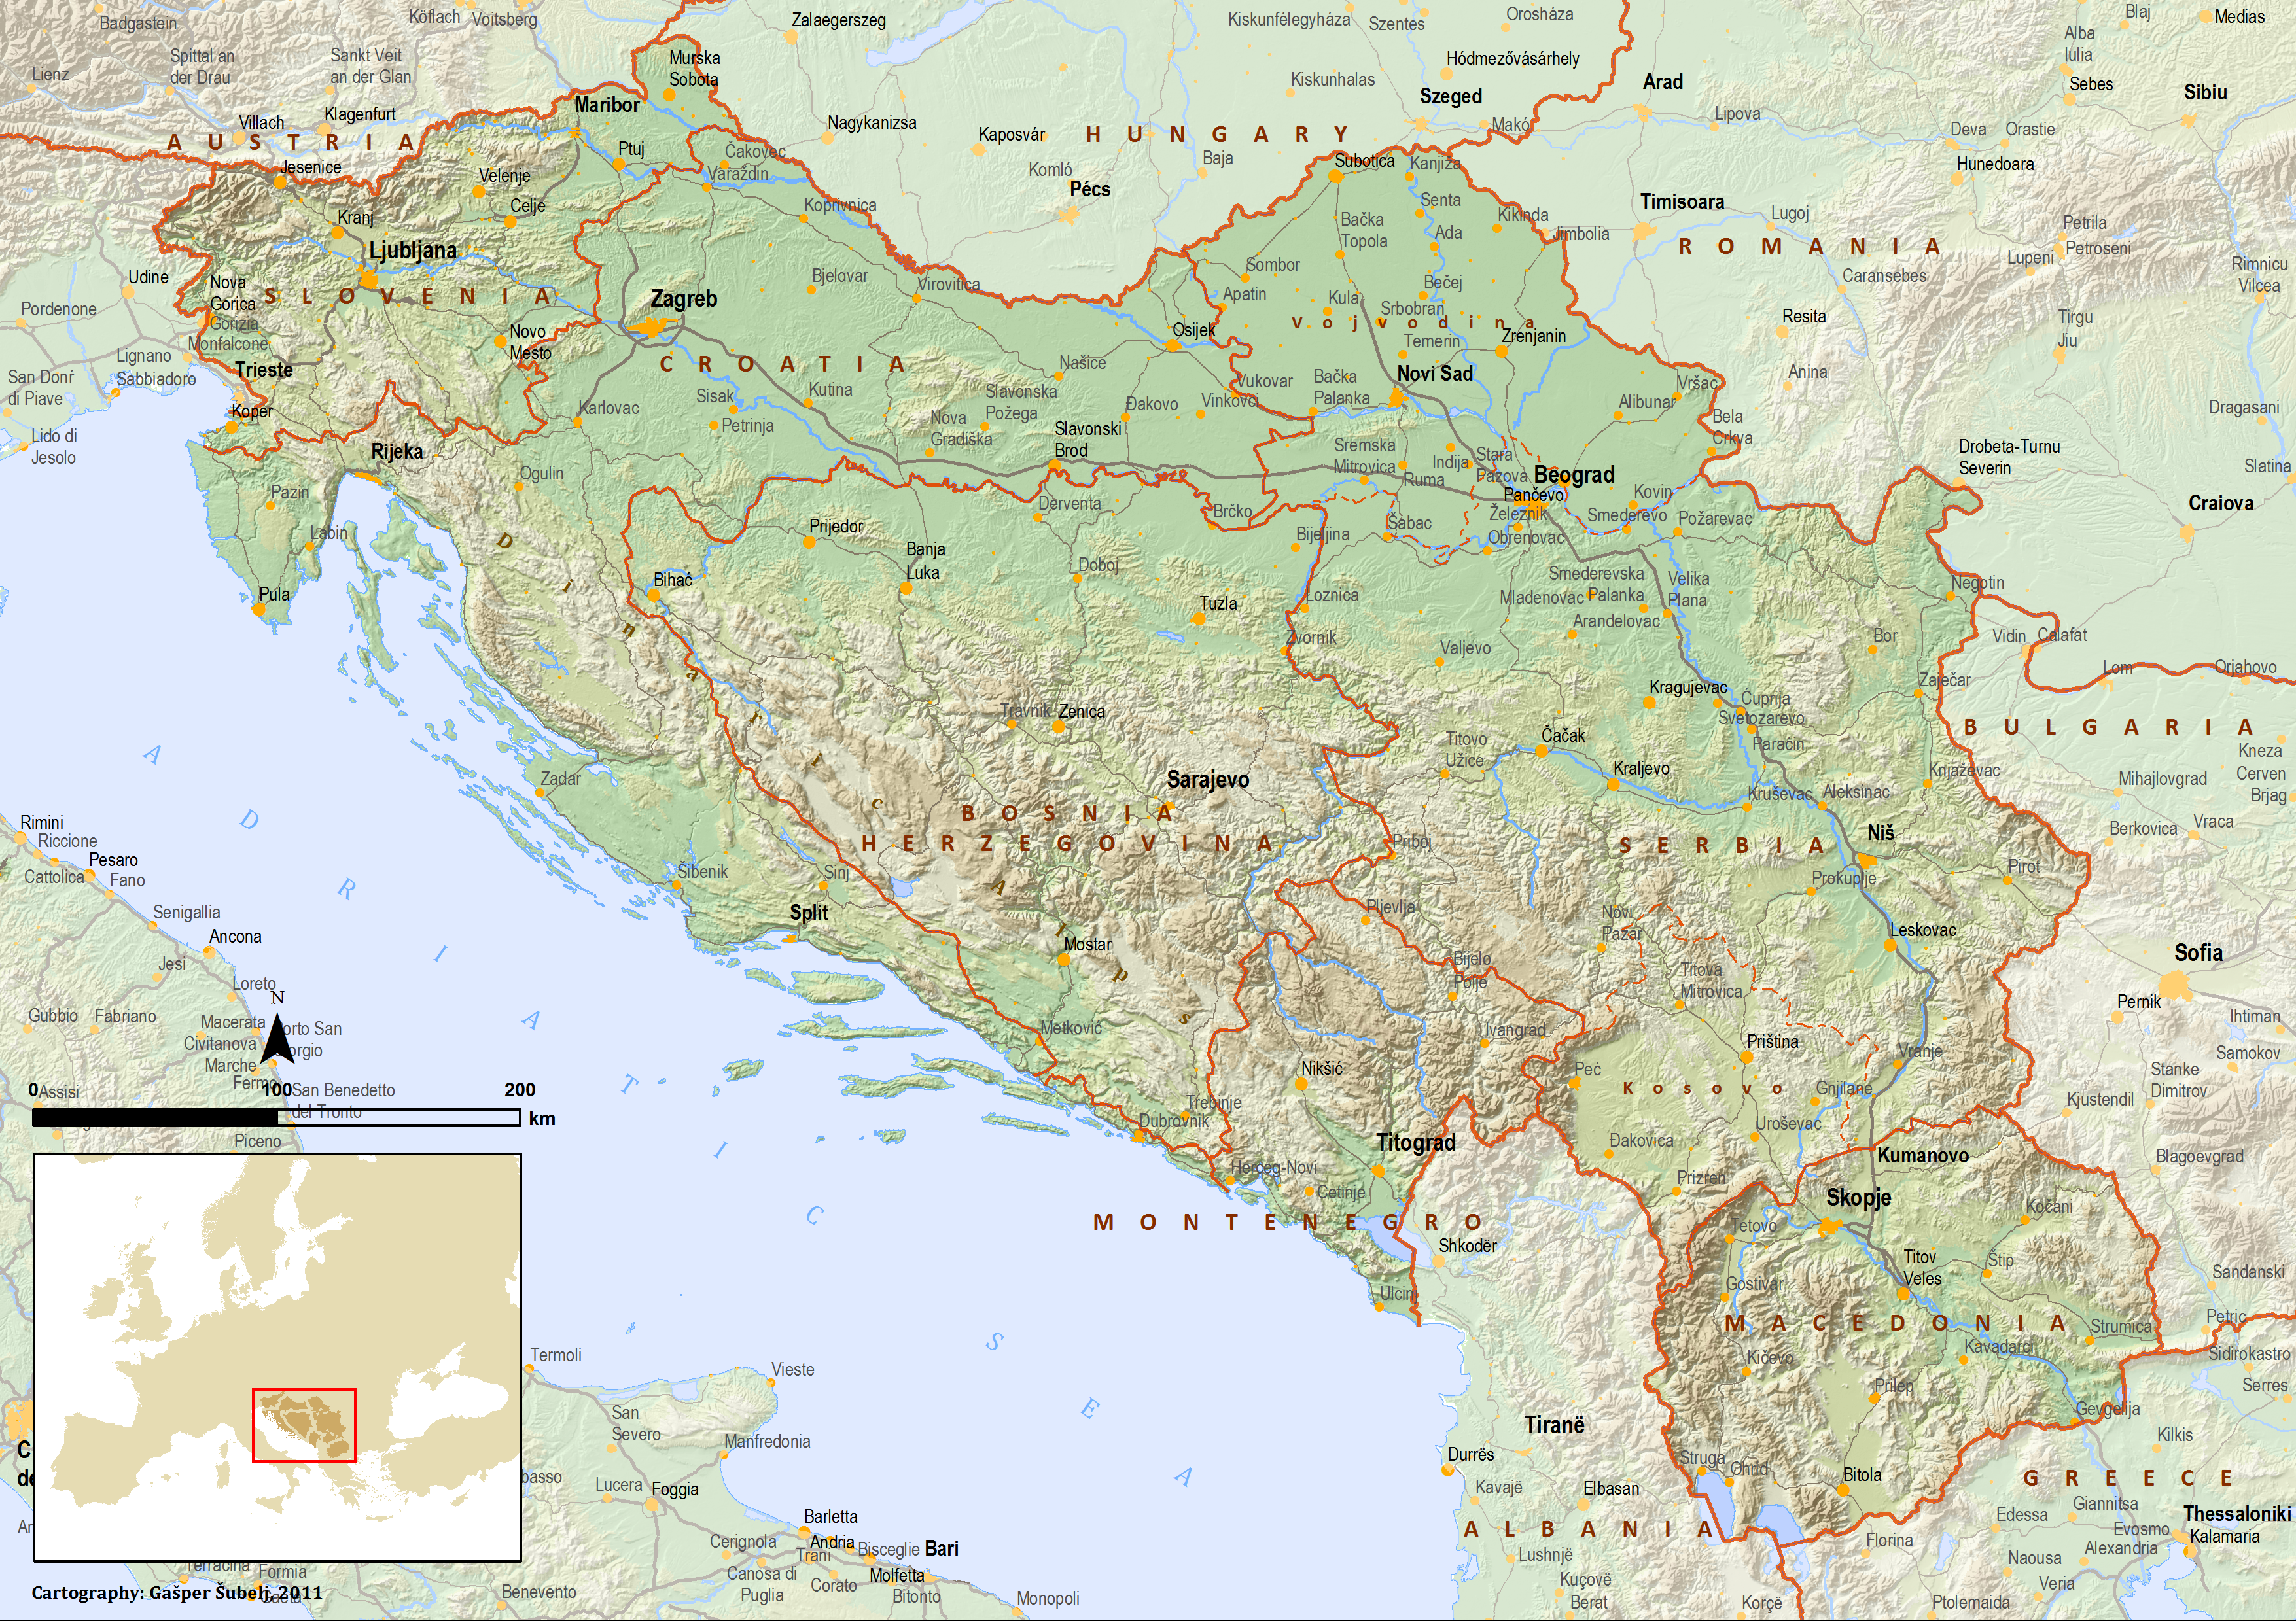 A general map of Socialist Federal Republic of Yugoslavia, as existed 1945-1991